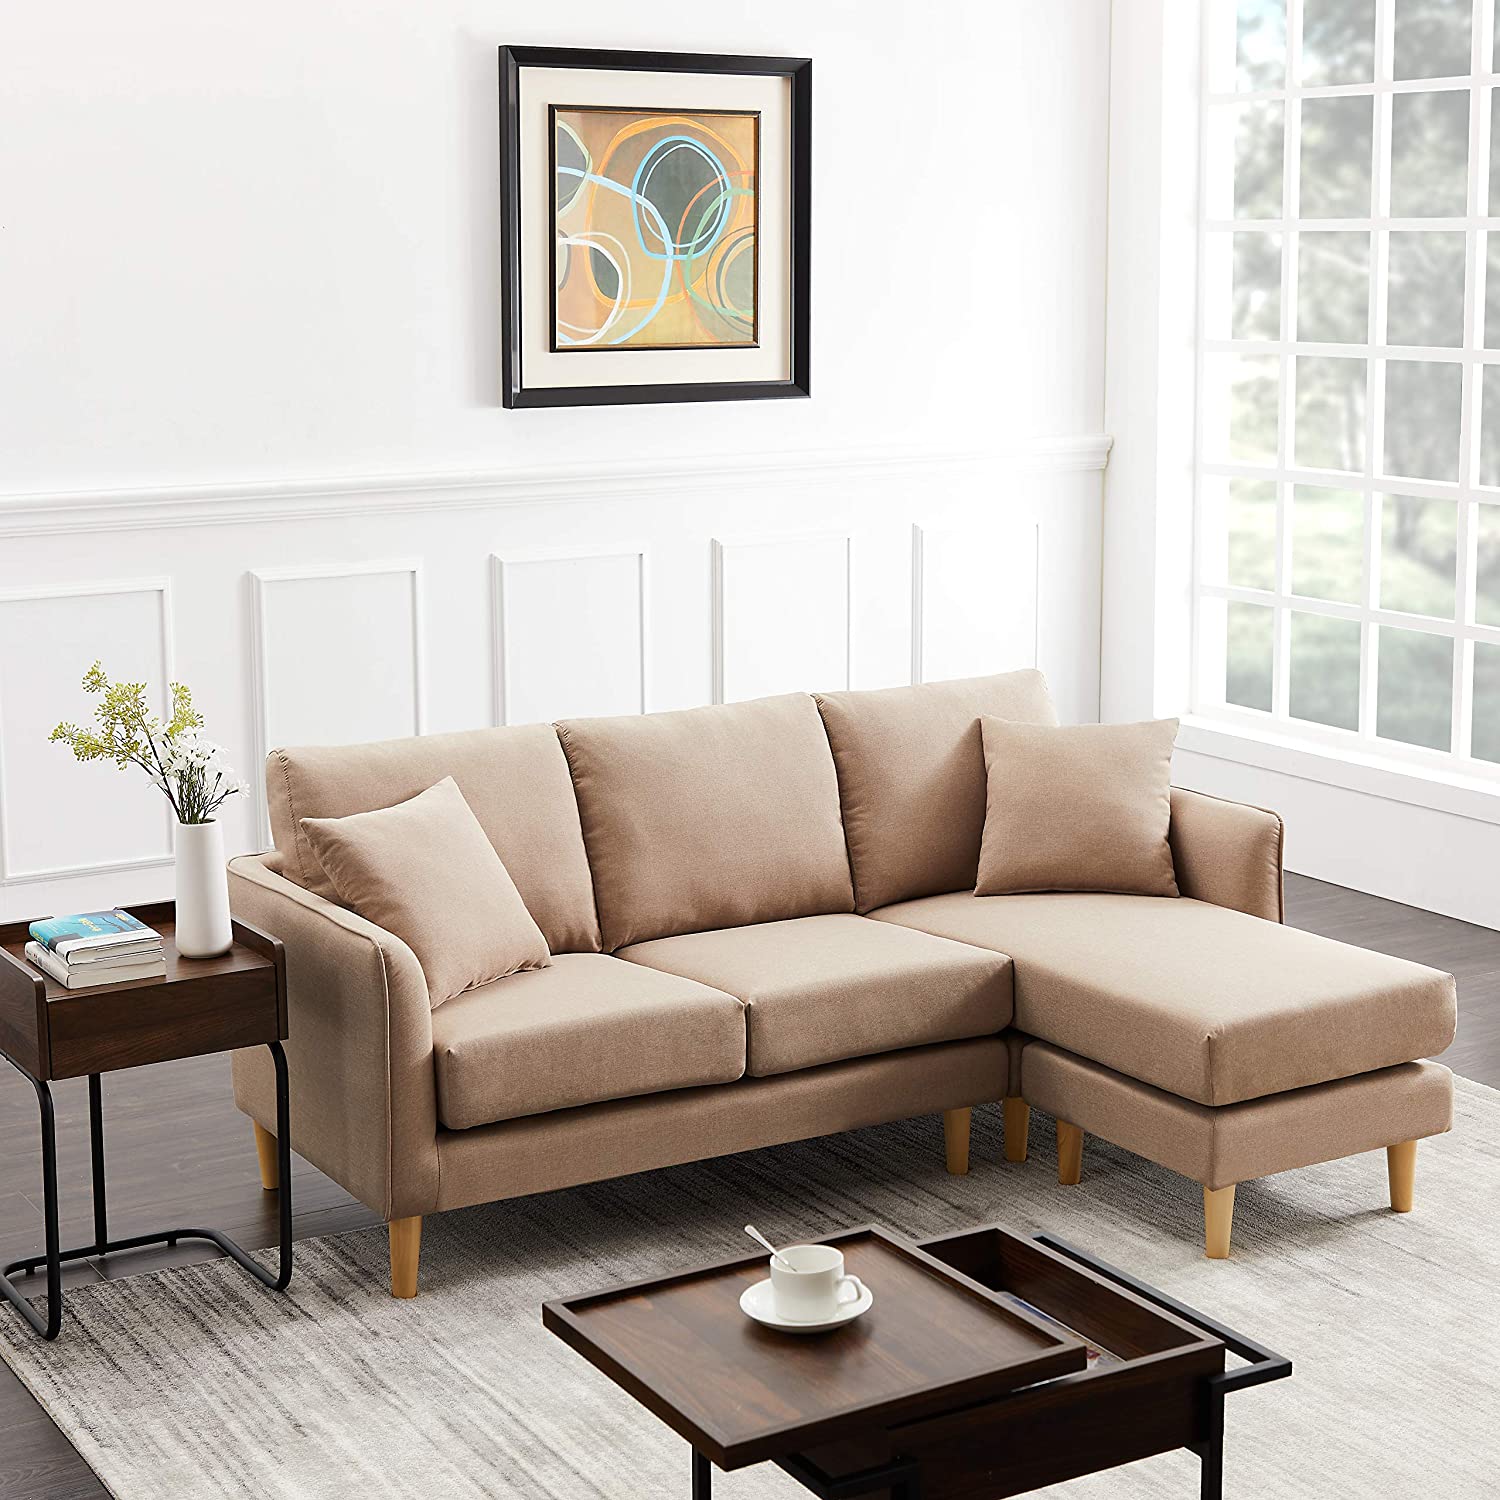 Carkoci Modern Style Convertible L-Shaped Couch Sofa